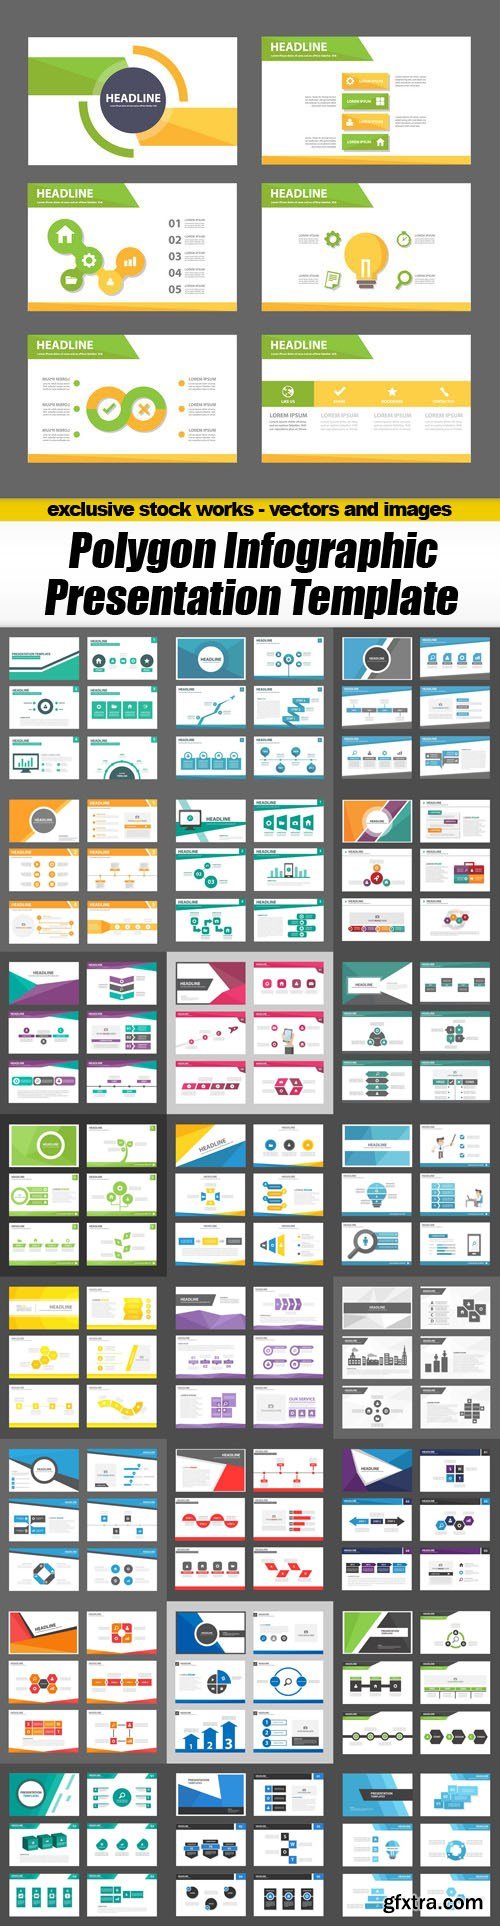 Polygon Infographic Presentation Template - 25xEPS